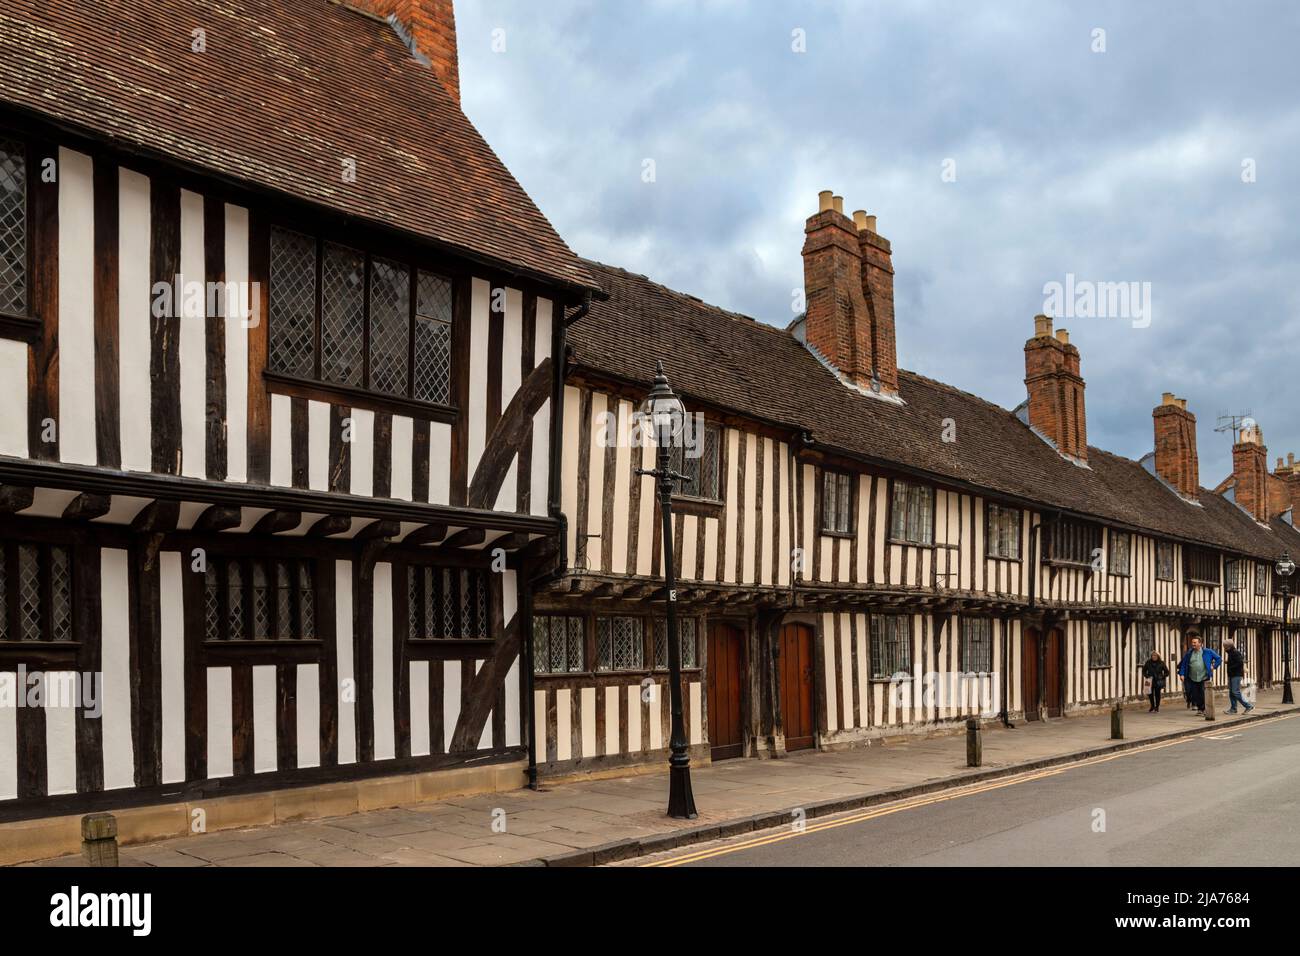 A row of 15th century half-timbered almshouses in Church Street, Stratford-upon-Avon, Warwickshire, England, UK. Stock Photo